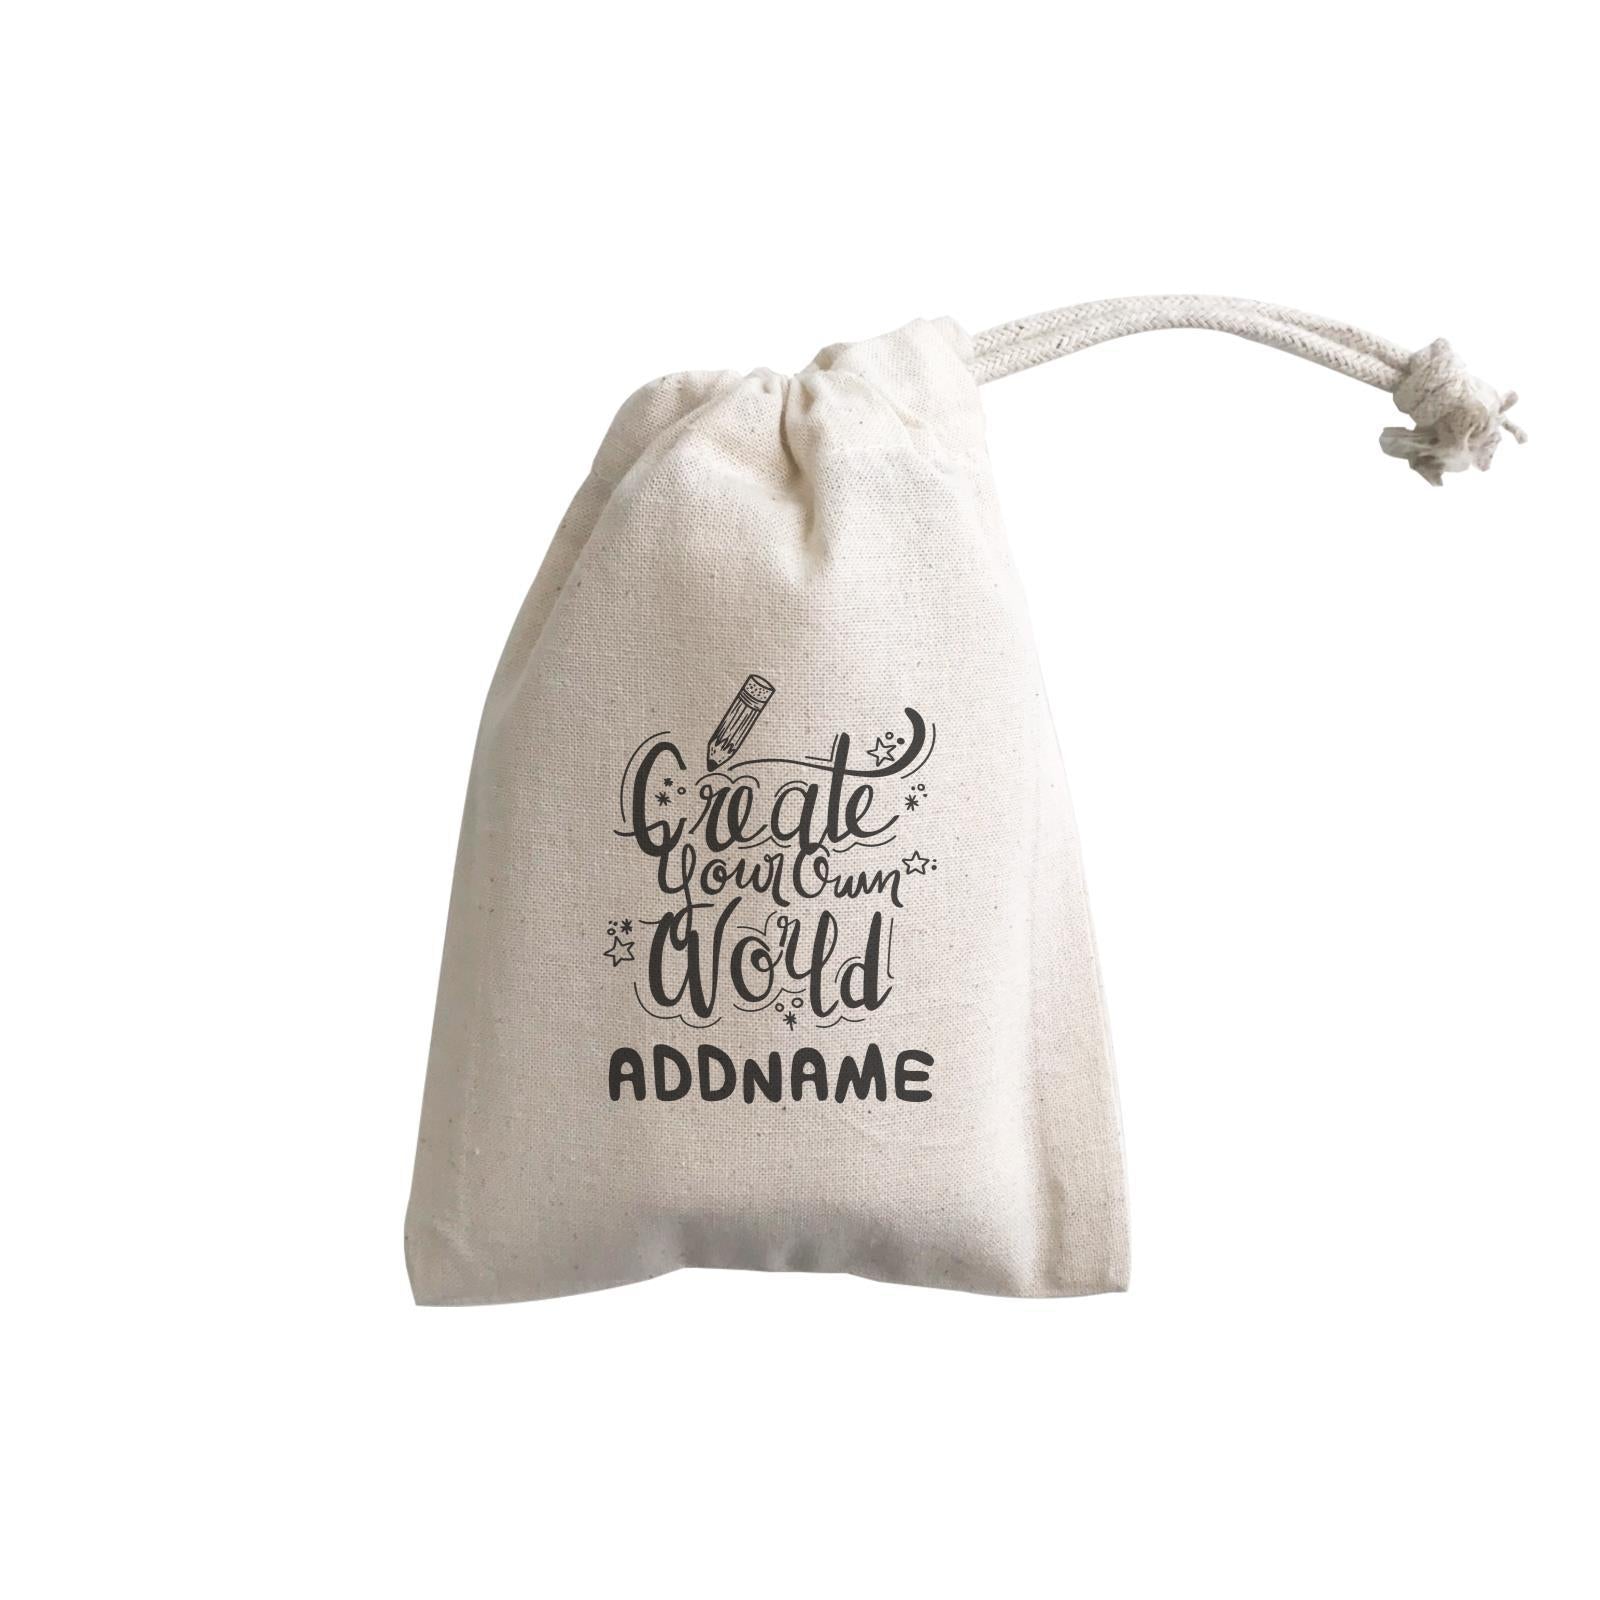 Children's Day Gift Series Create Your Own World Addname  Gift Pouch